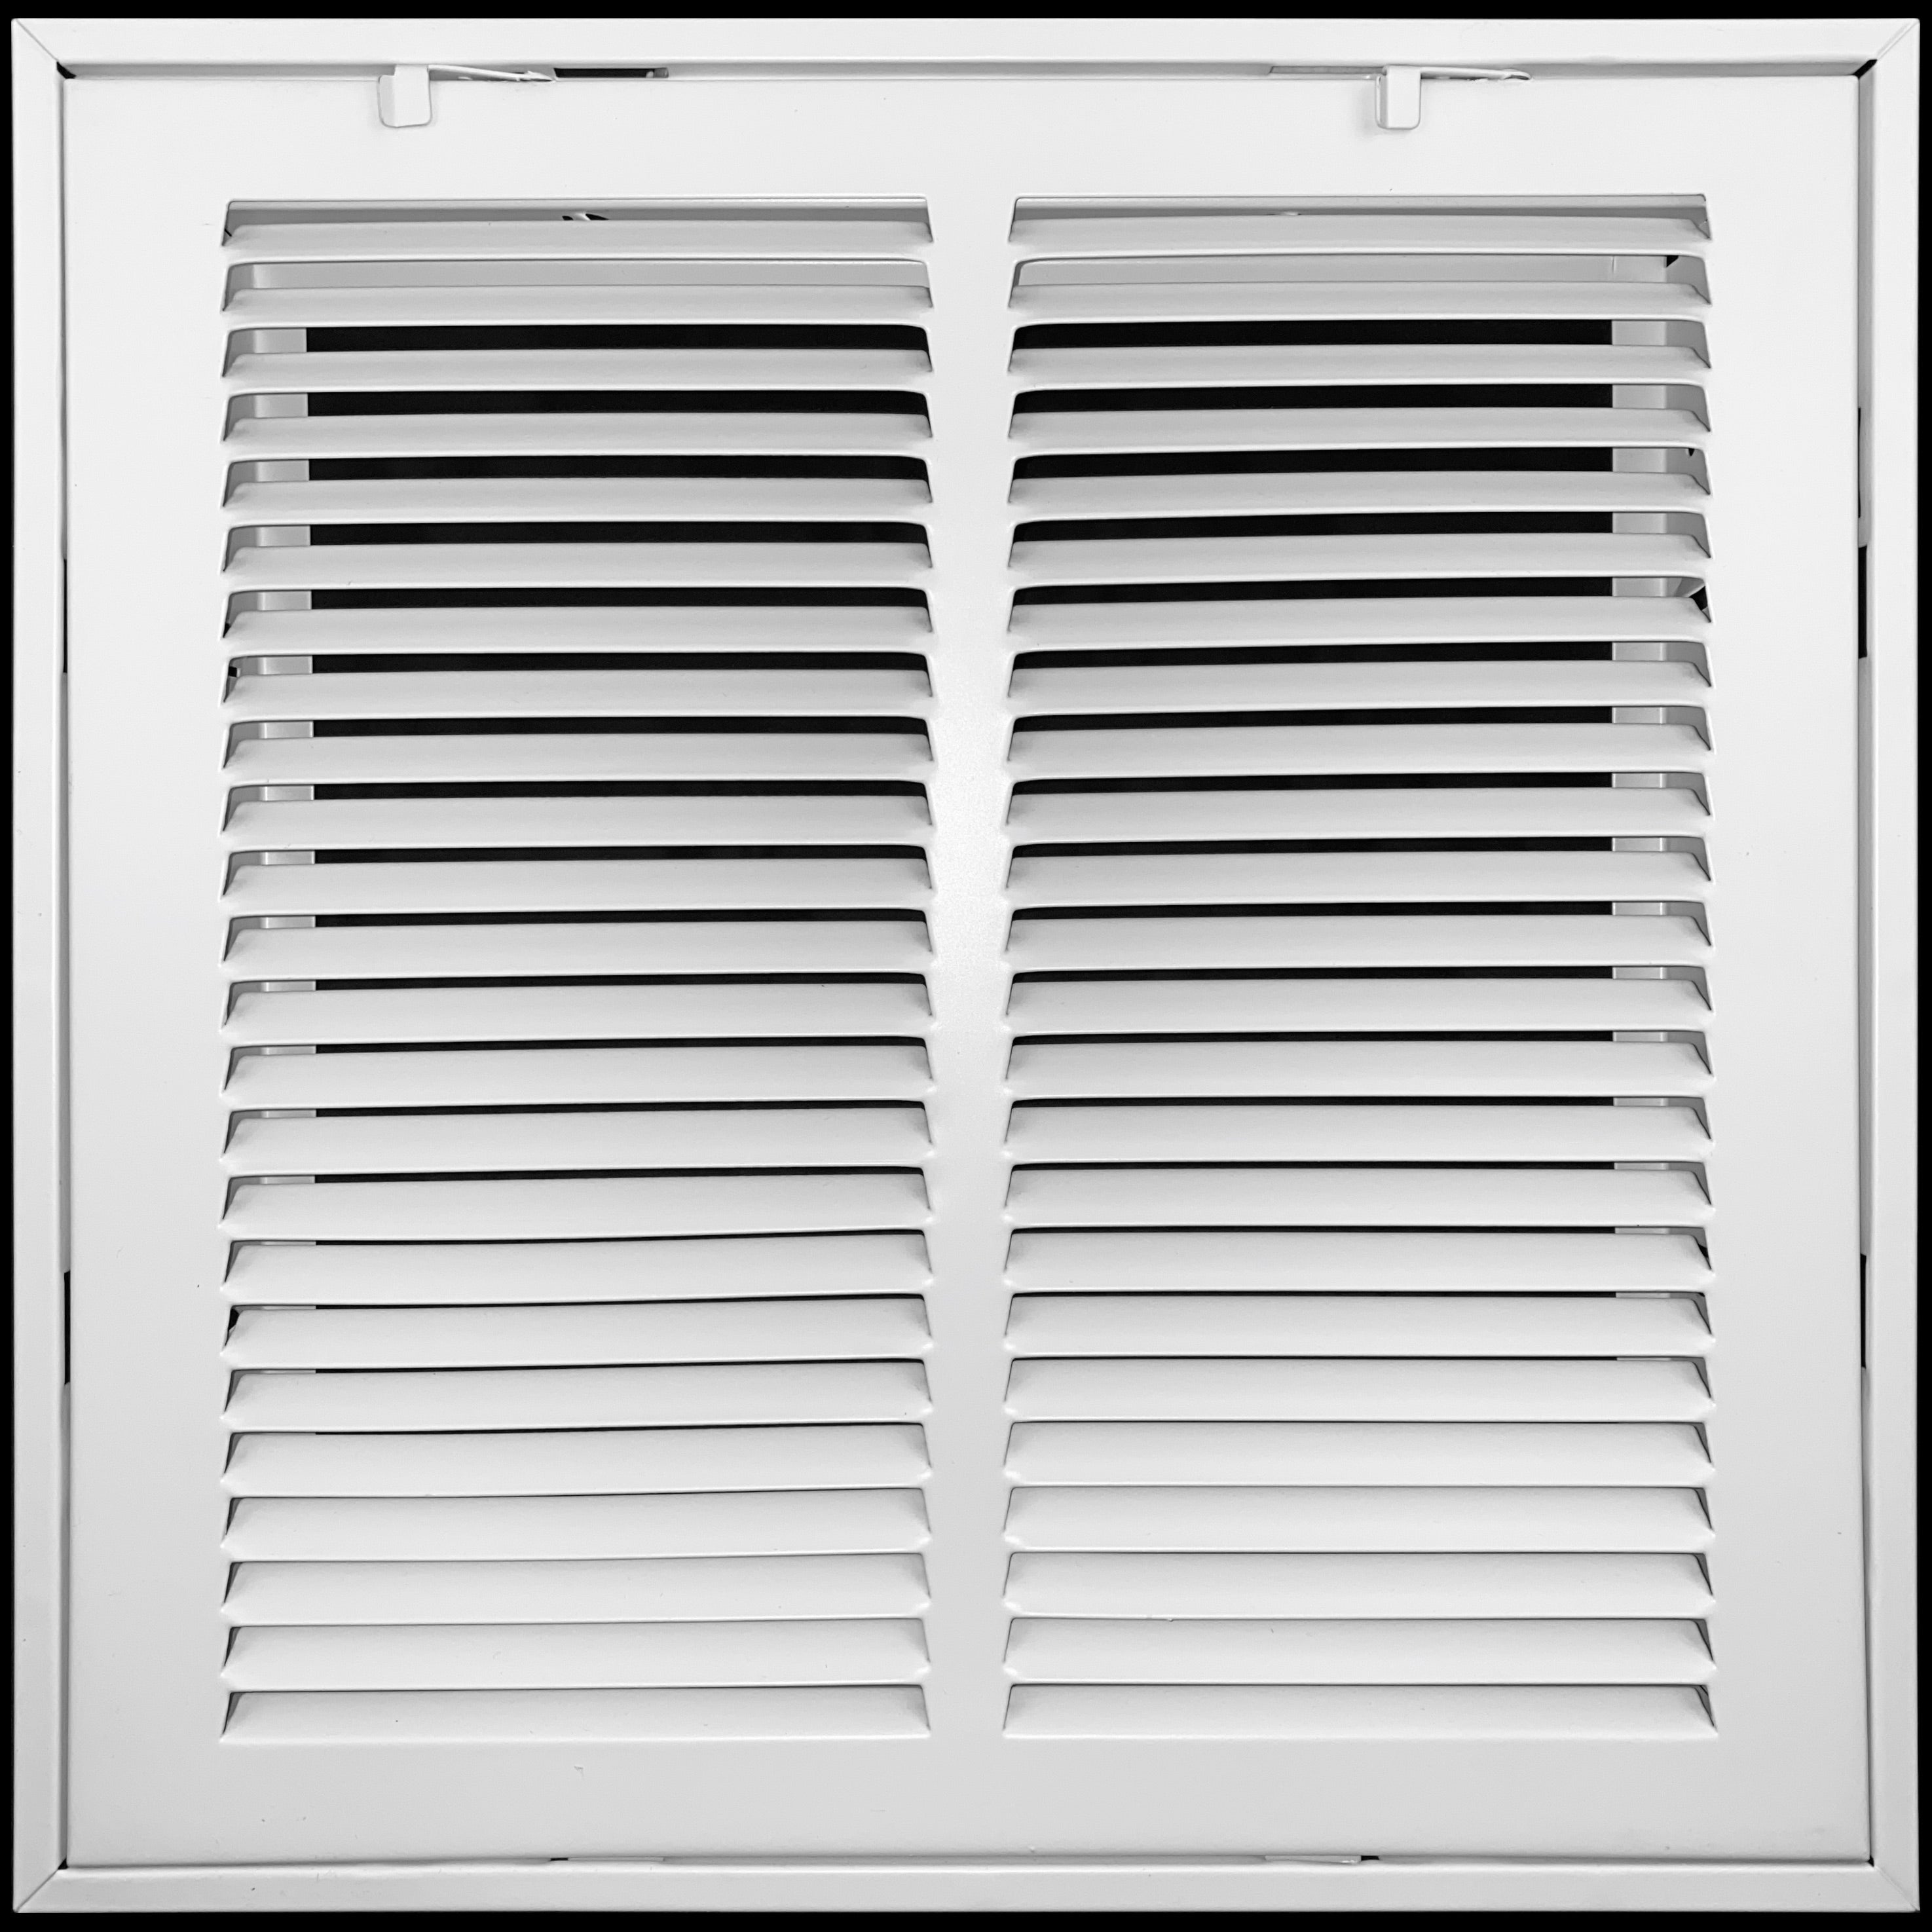 airgrilles 12" x 12" duct opening  -  steel return air filter grille  - fixed hinged -  for sidewall and ceiling hnd-fx-1rafg-wh-12x12 038775650625 - 1